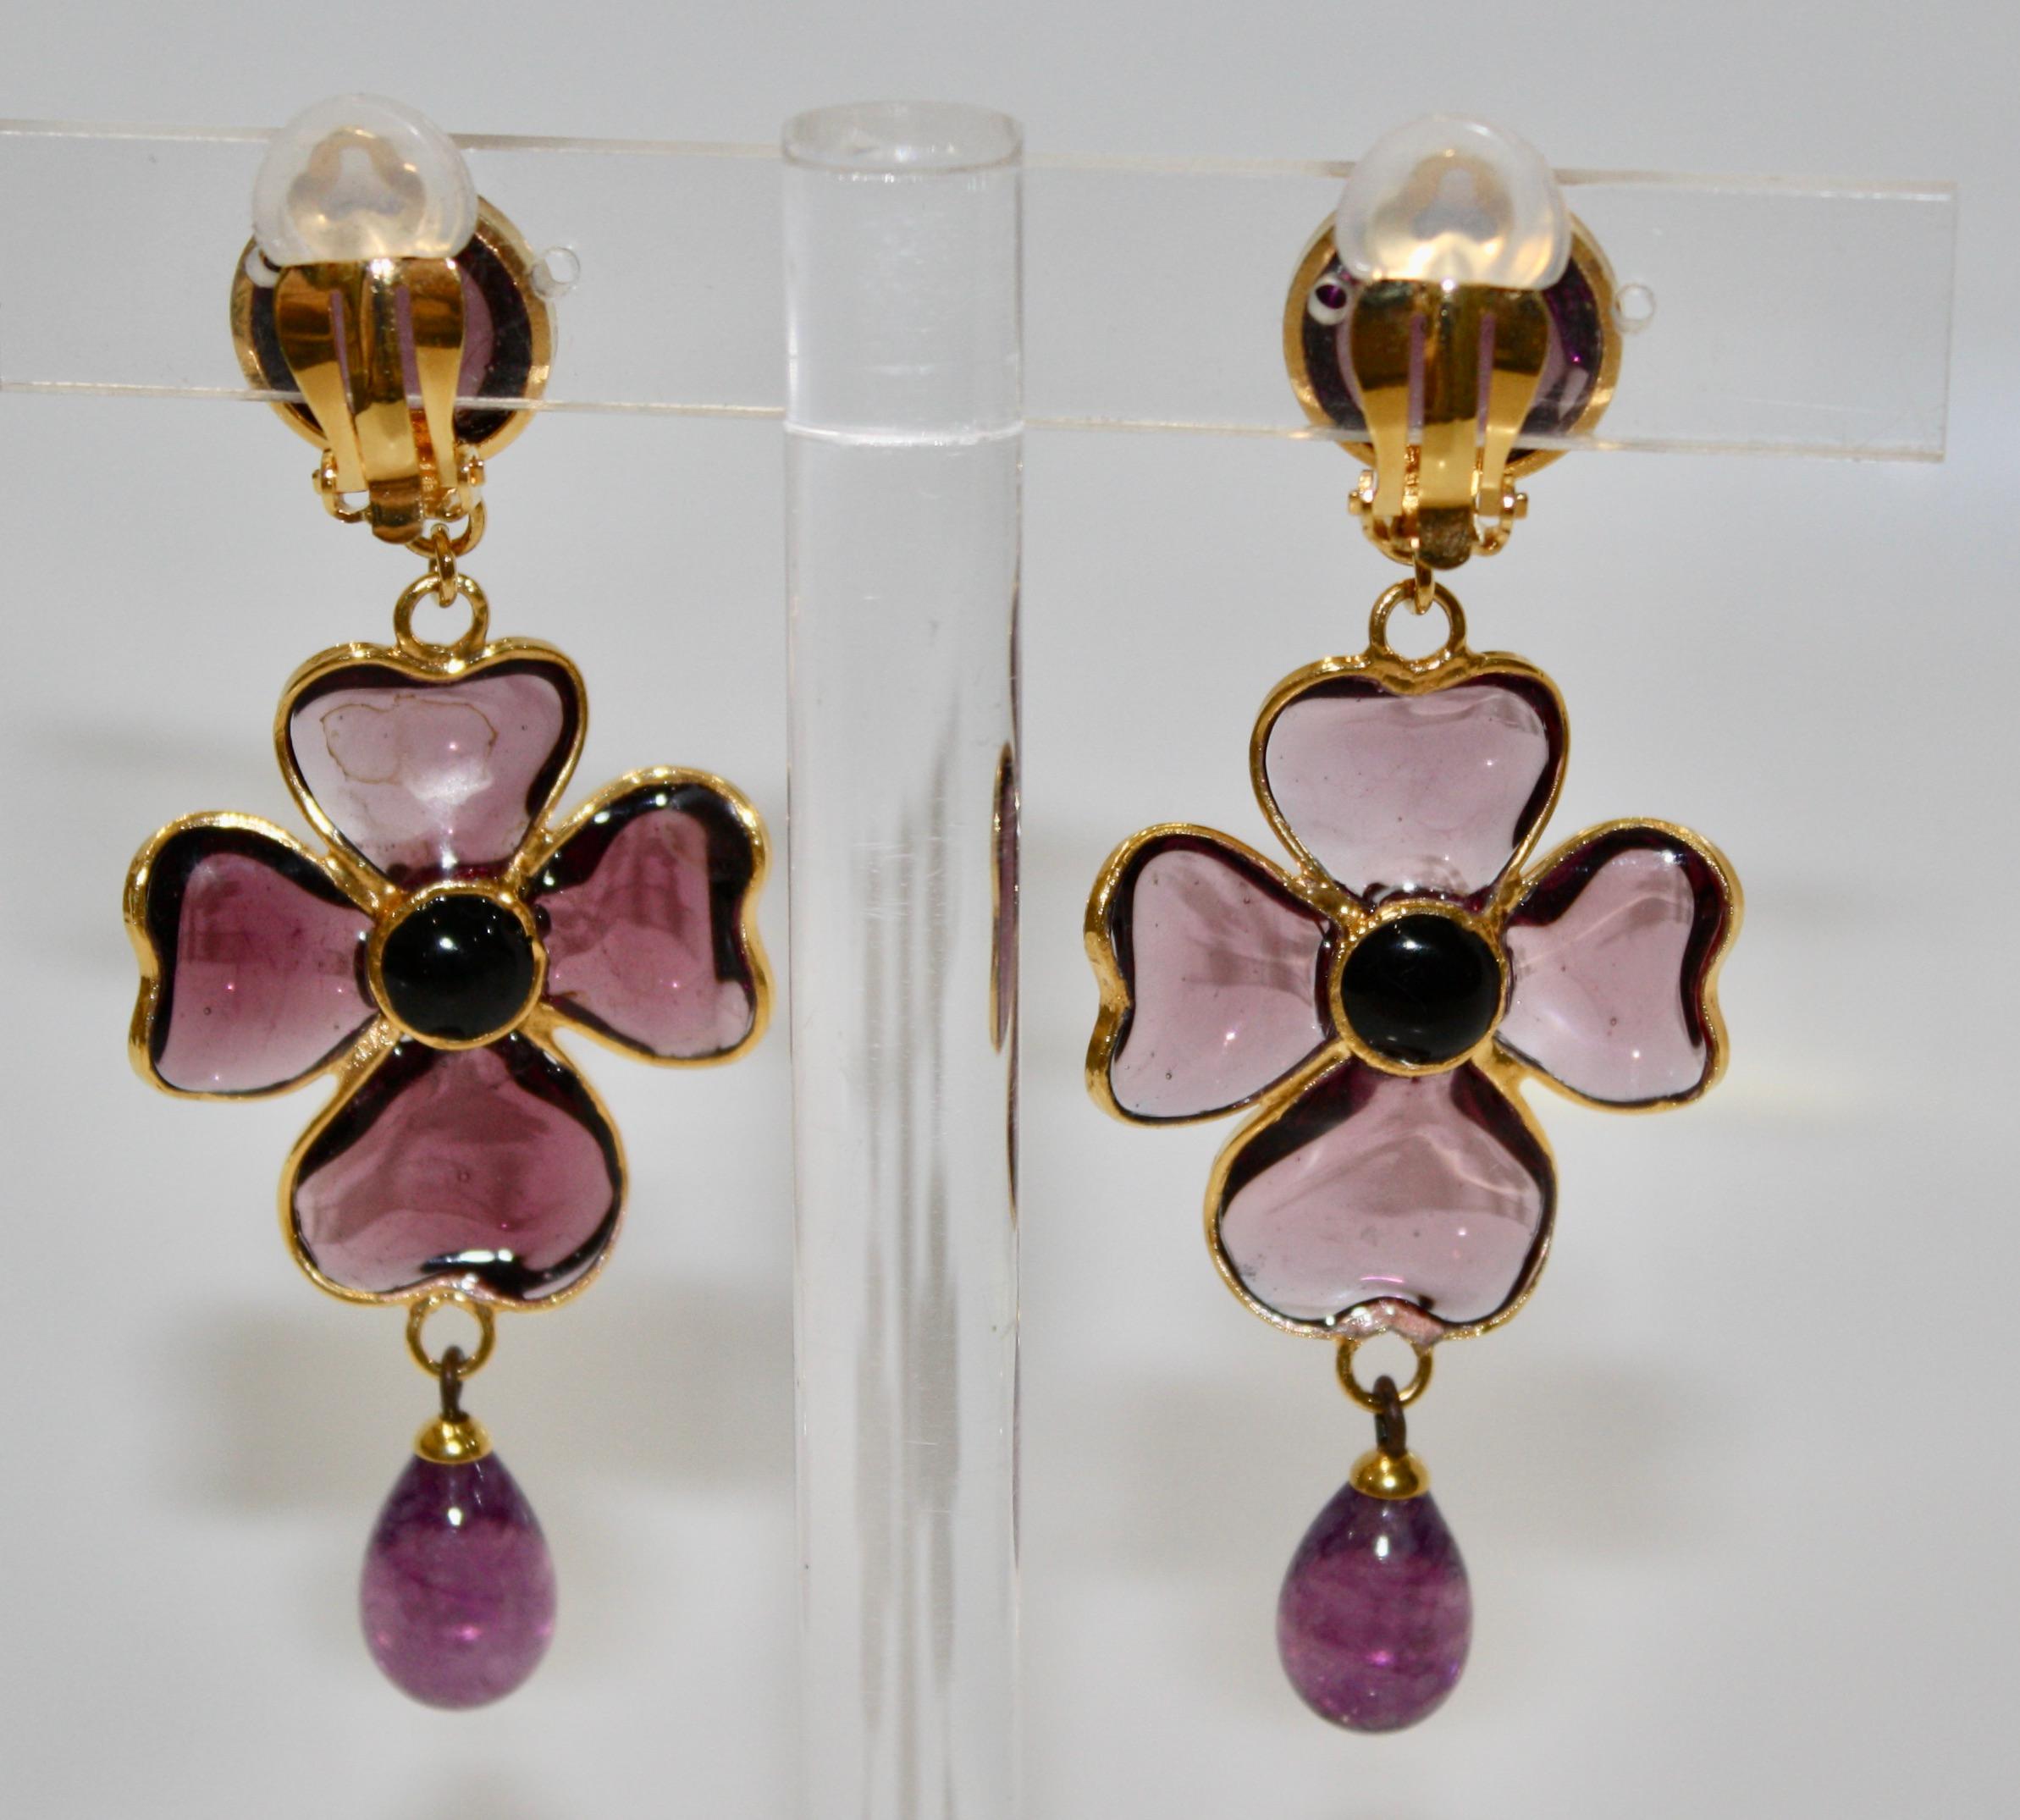 Design by Françoise Montague. Gripoix work by former artisans of the atelier. Clip earrings Gripoix work ( famed pate de verre  for the House of Chanel) was used for these clover drop earrings. Poured glass in purple , gilded brass 
Clip earrings.